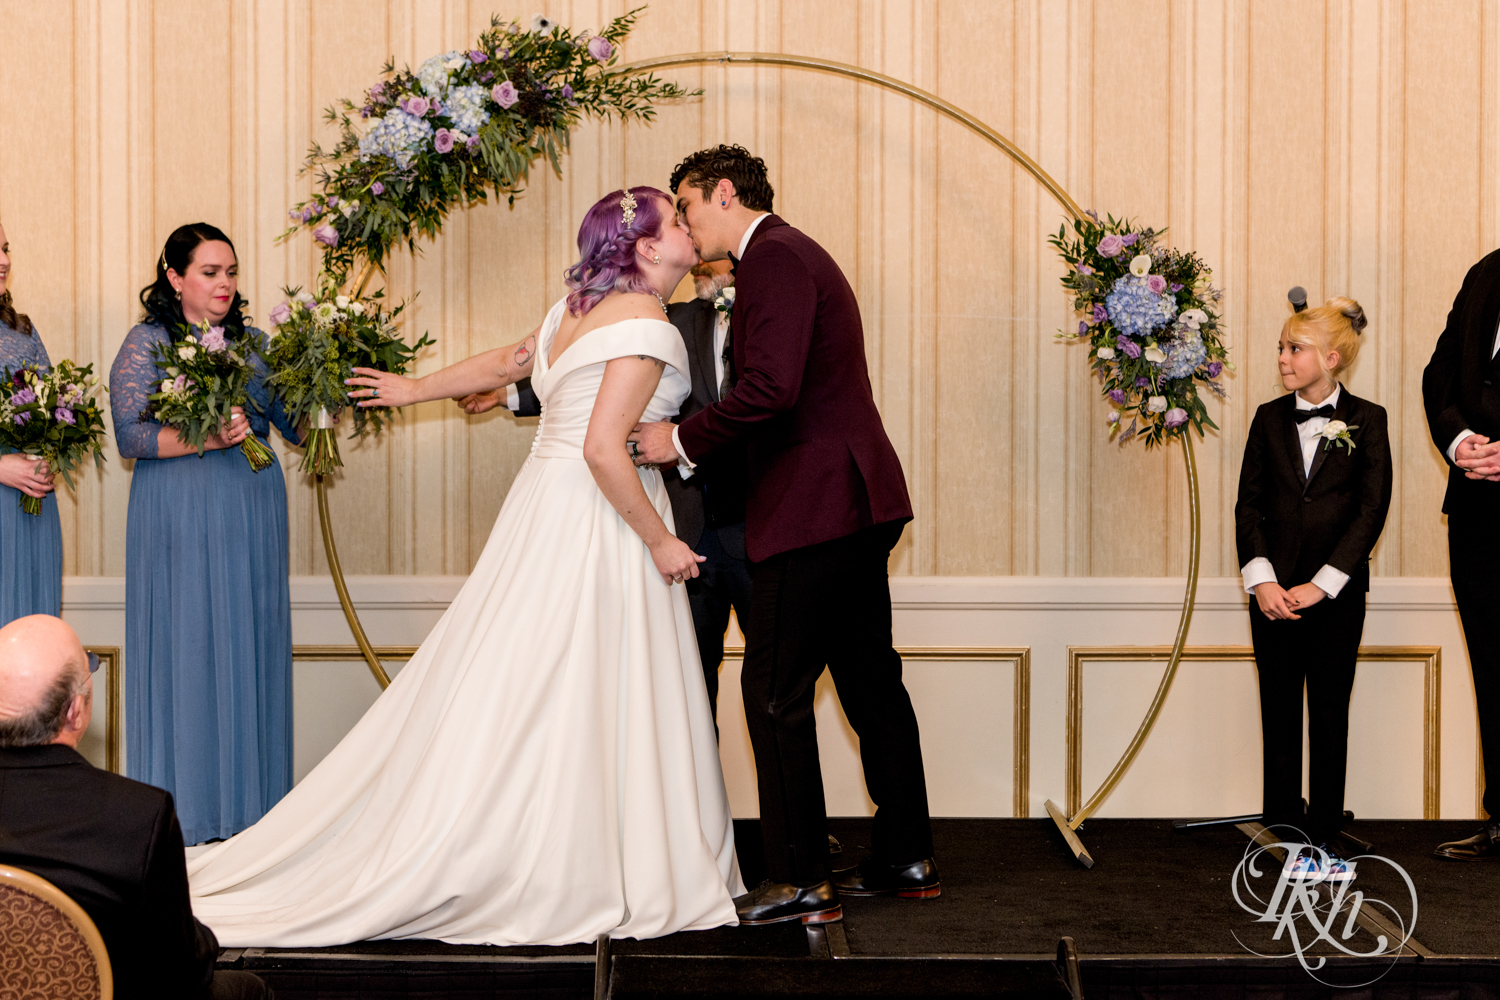 Bride and groom kiss at wedding ceremony at the Saint Paul Hotel in Saint Paul, Minnesota.